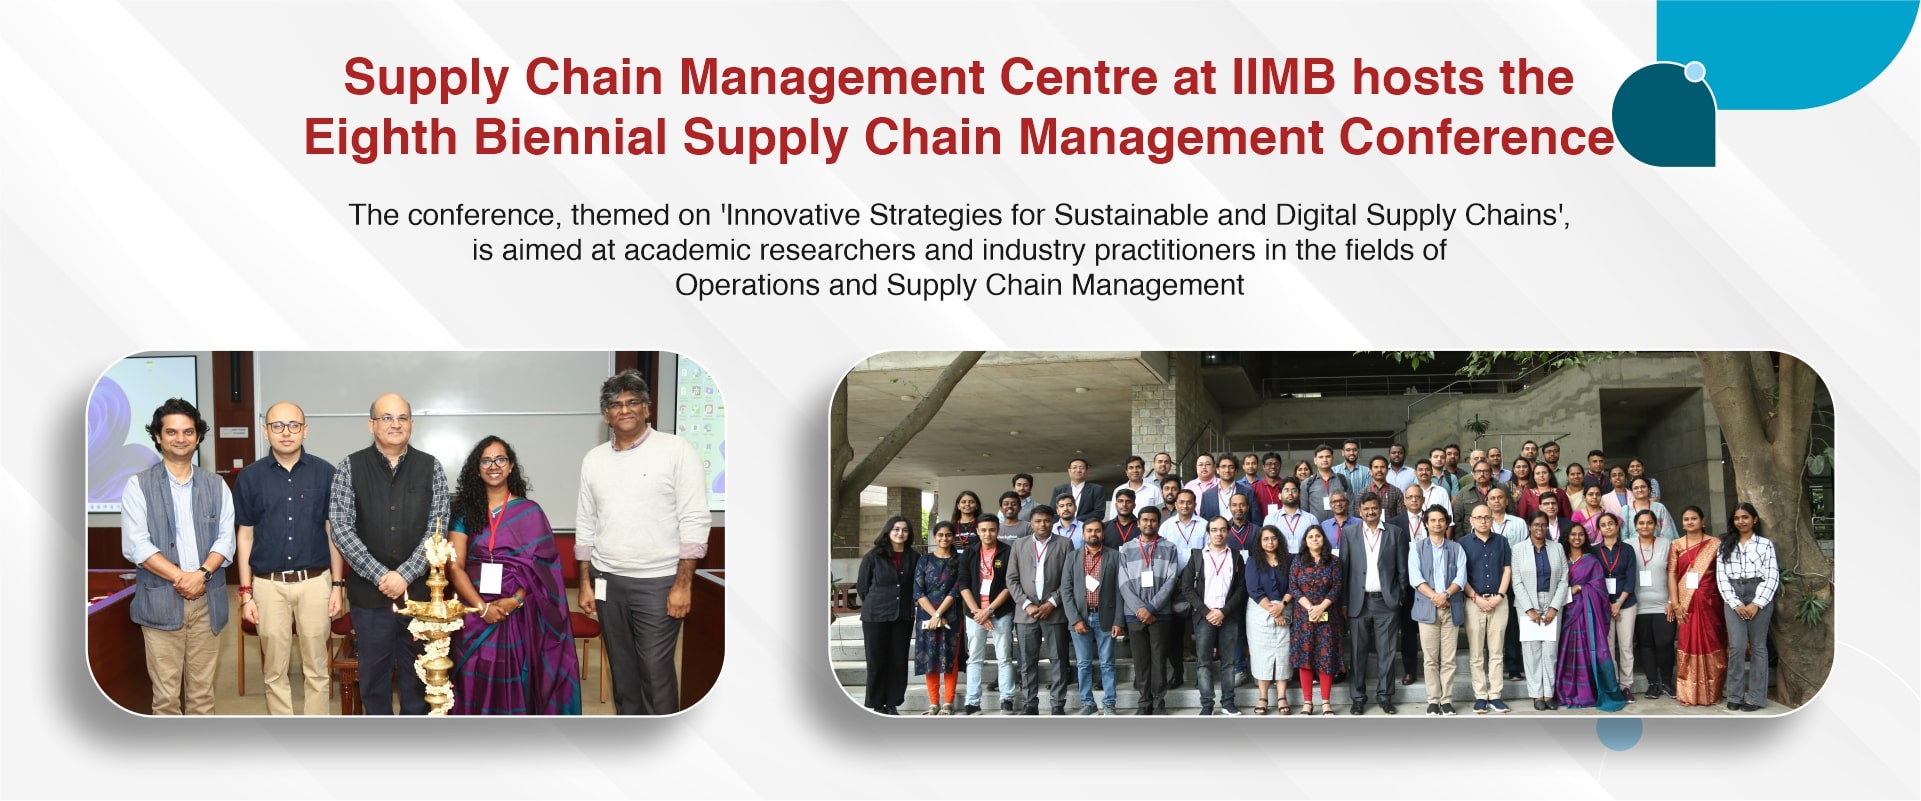 Supply Chain Management Centre at IIMB hosts the Eighth Biennial Supply Chain Management Conference